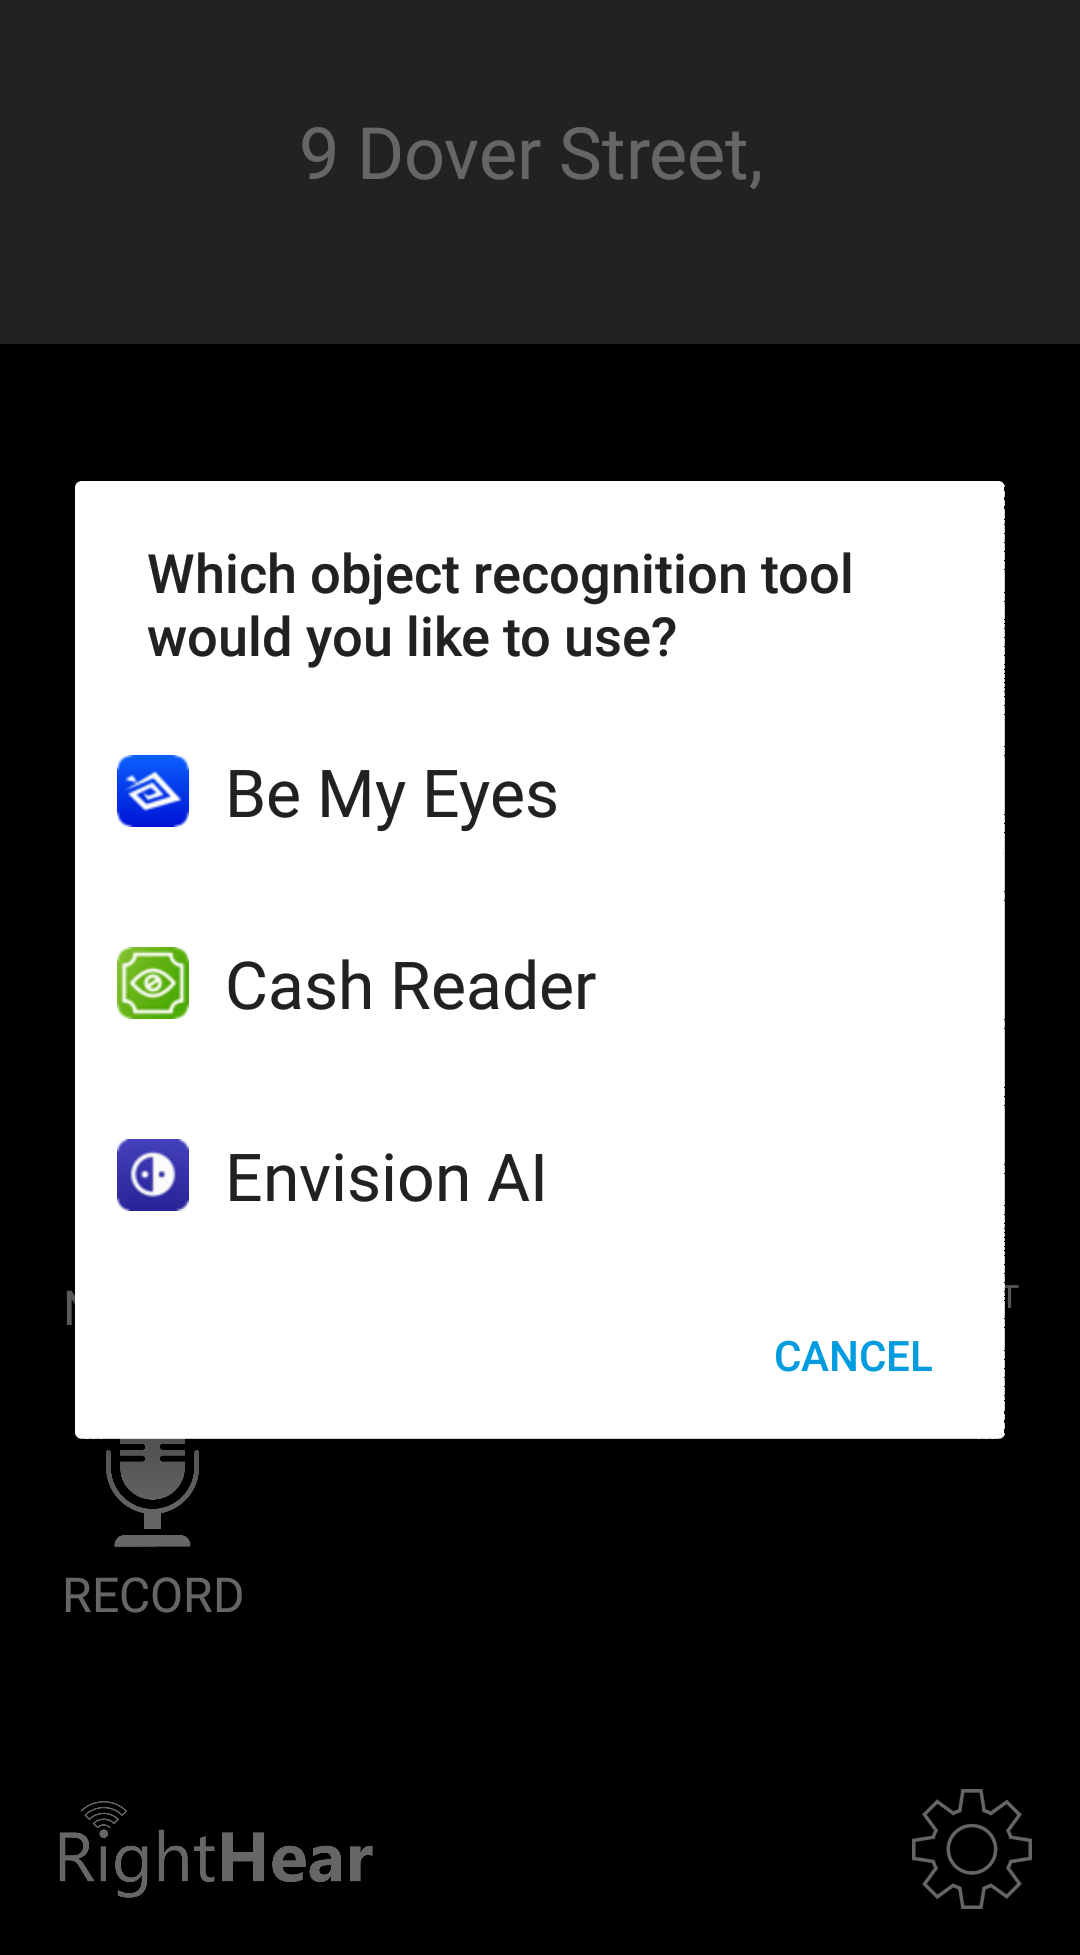 RightHear Accessibility App Object Identification Tool